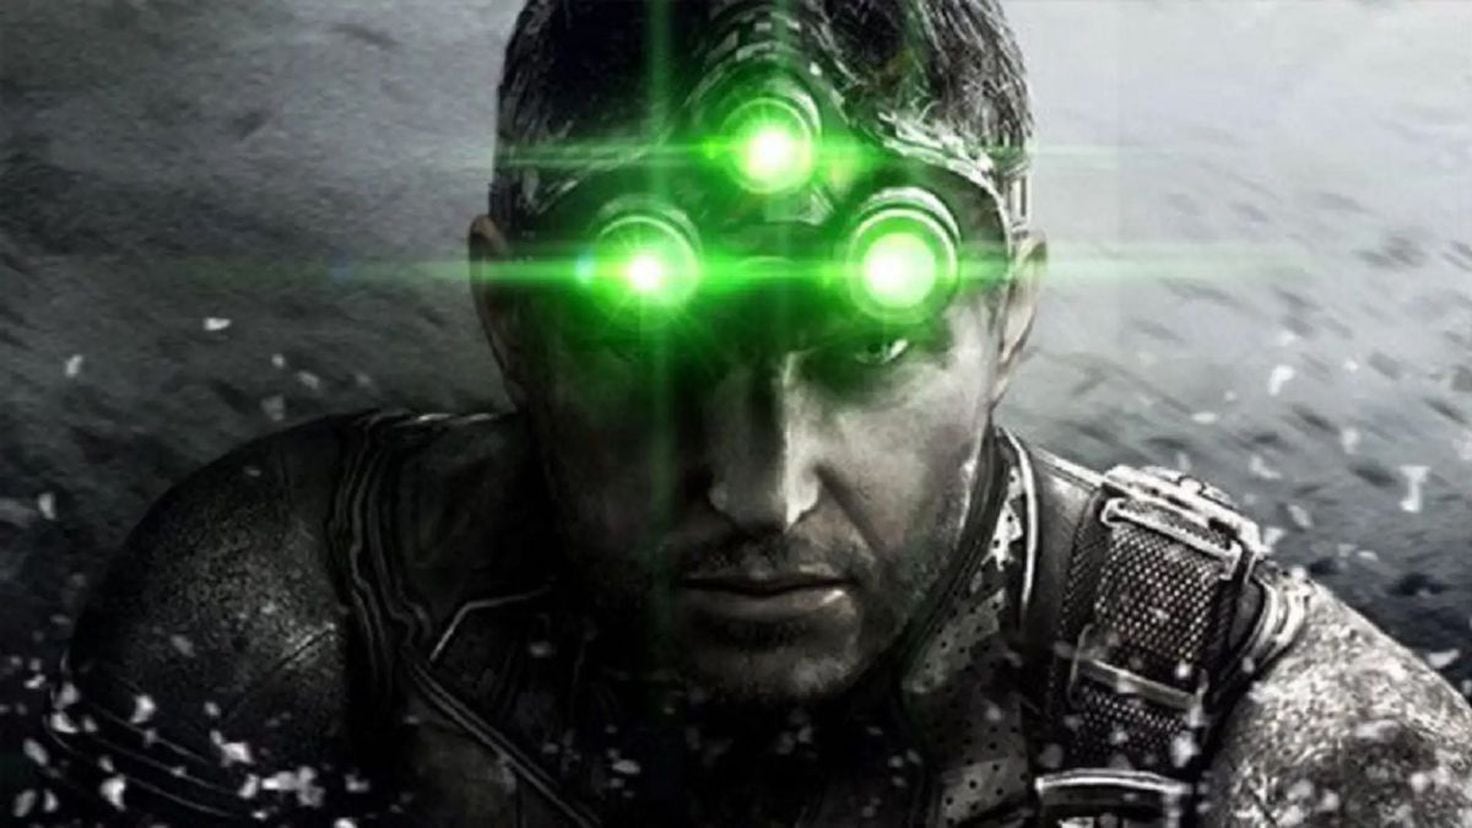 What we want to see in the new Splinter Cell